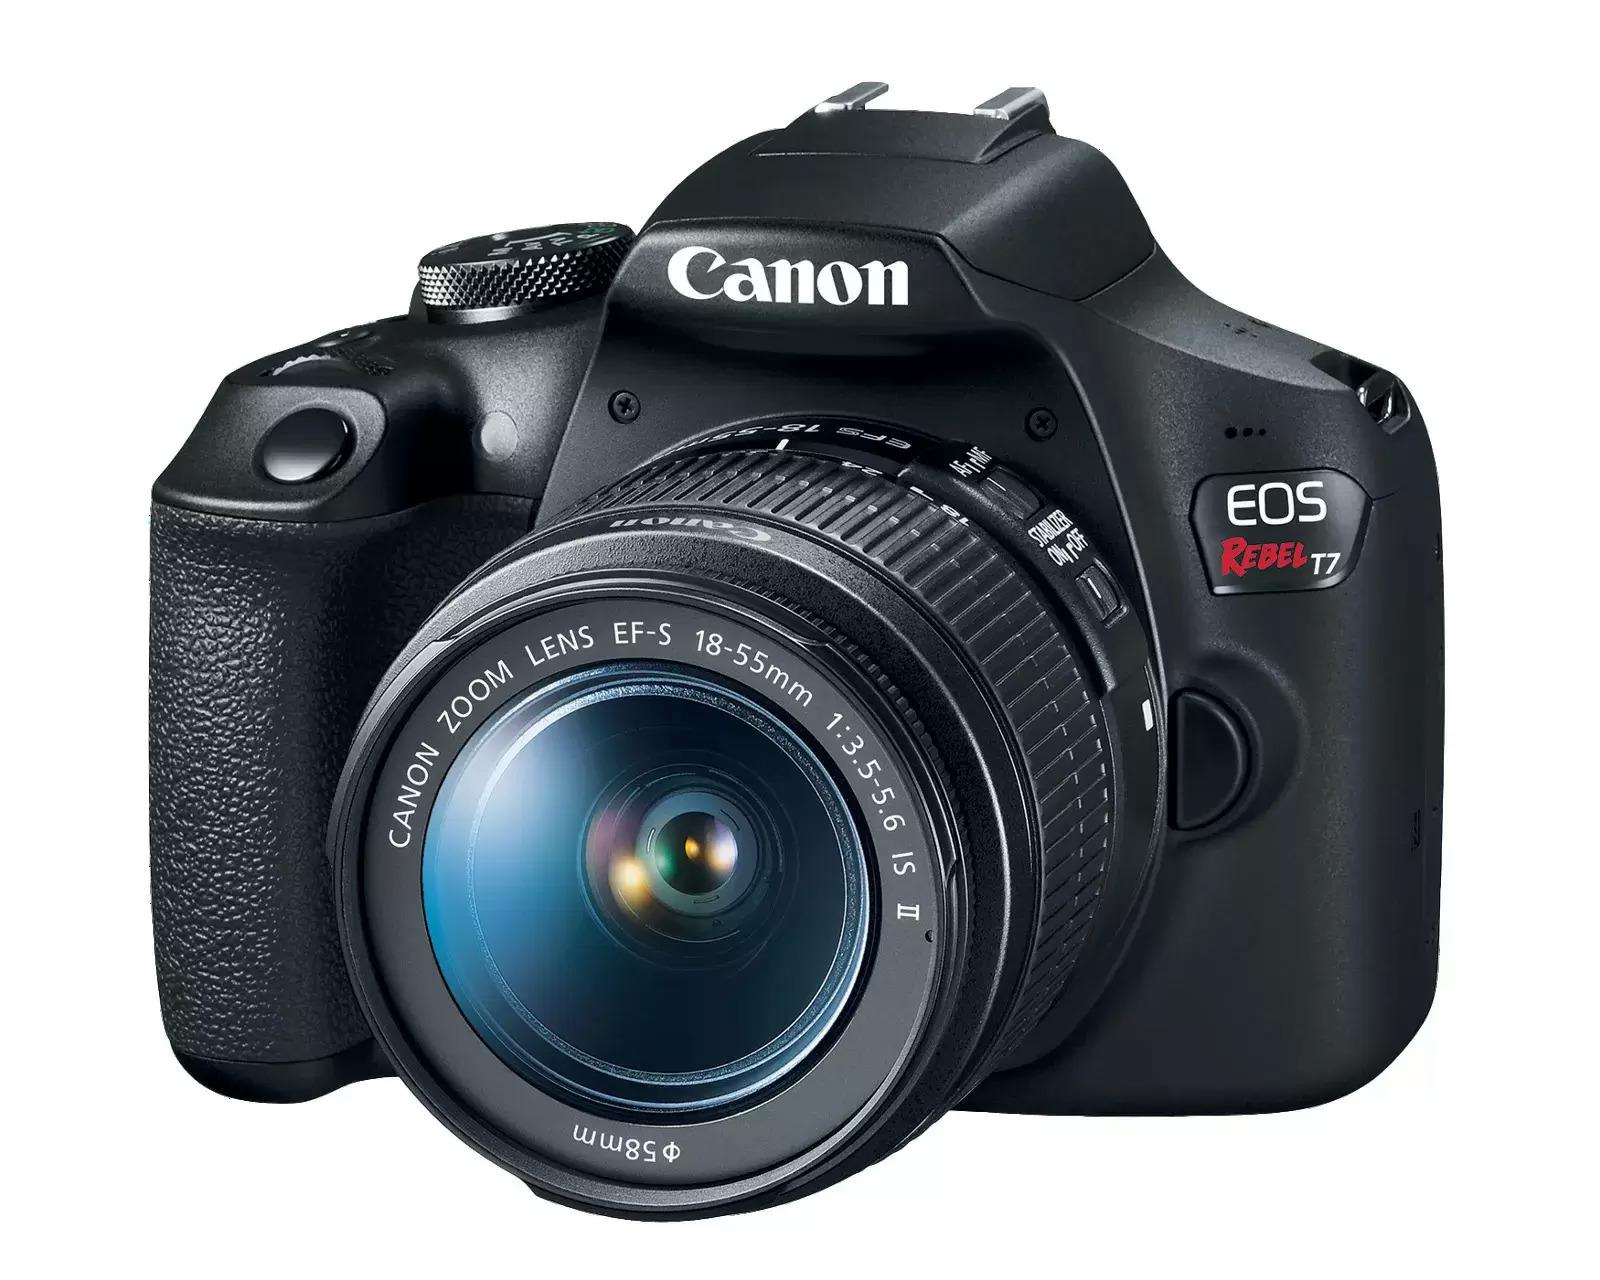 Canon EOS Rebel T7 EF-S 18-55mm f/3.5-5.6 IS II Lens Kit Refurbished for $229 Shipped